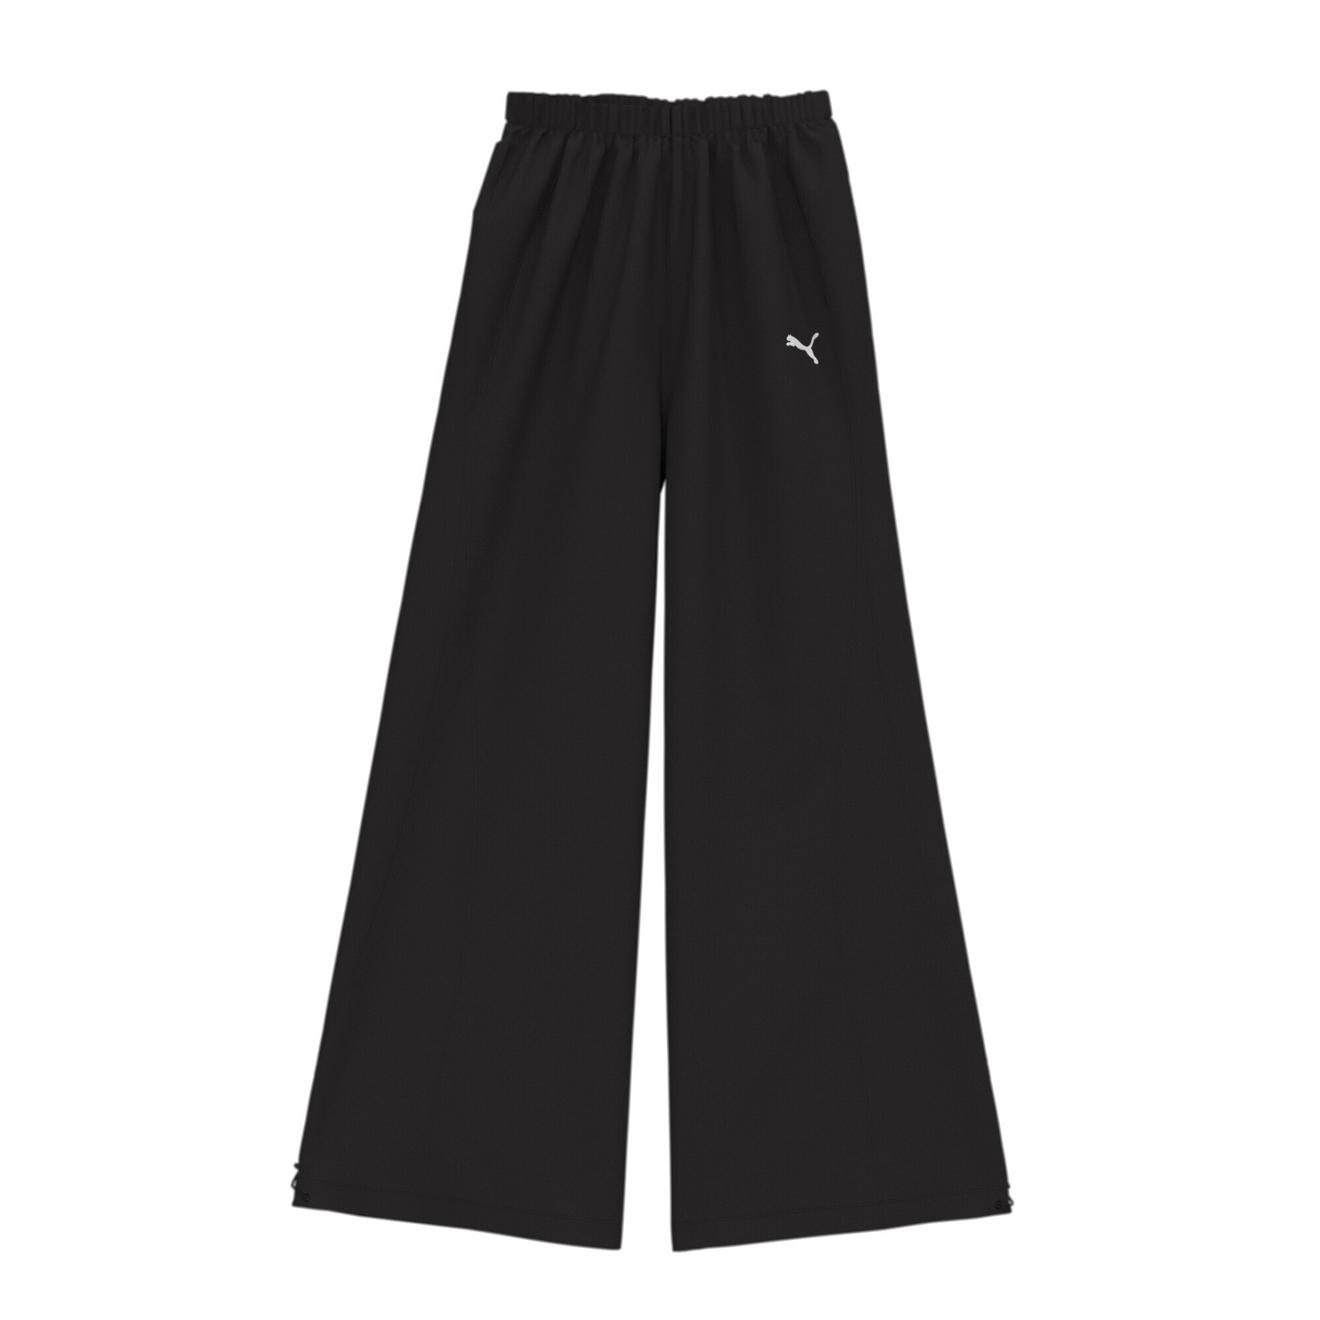 DARE TO Parachute Pants offers at 239 Dhs in Puma